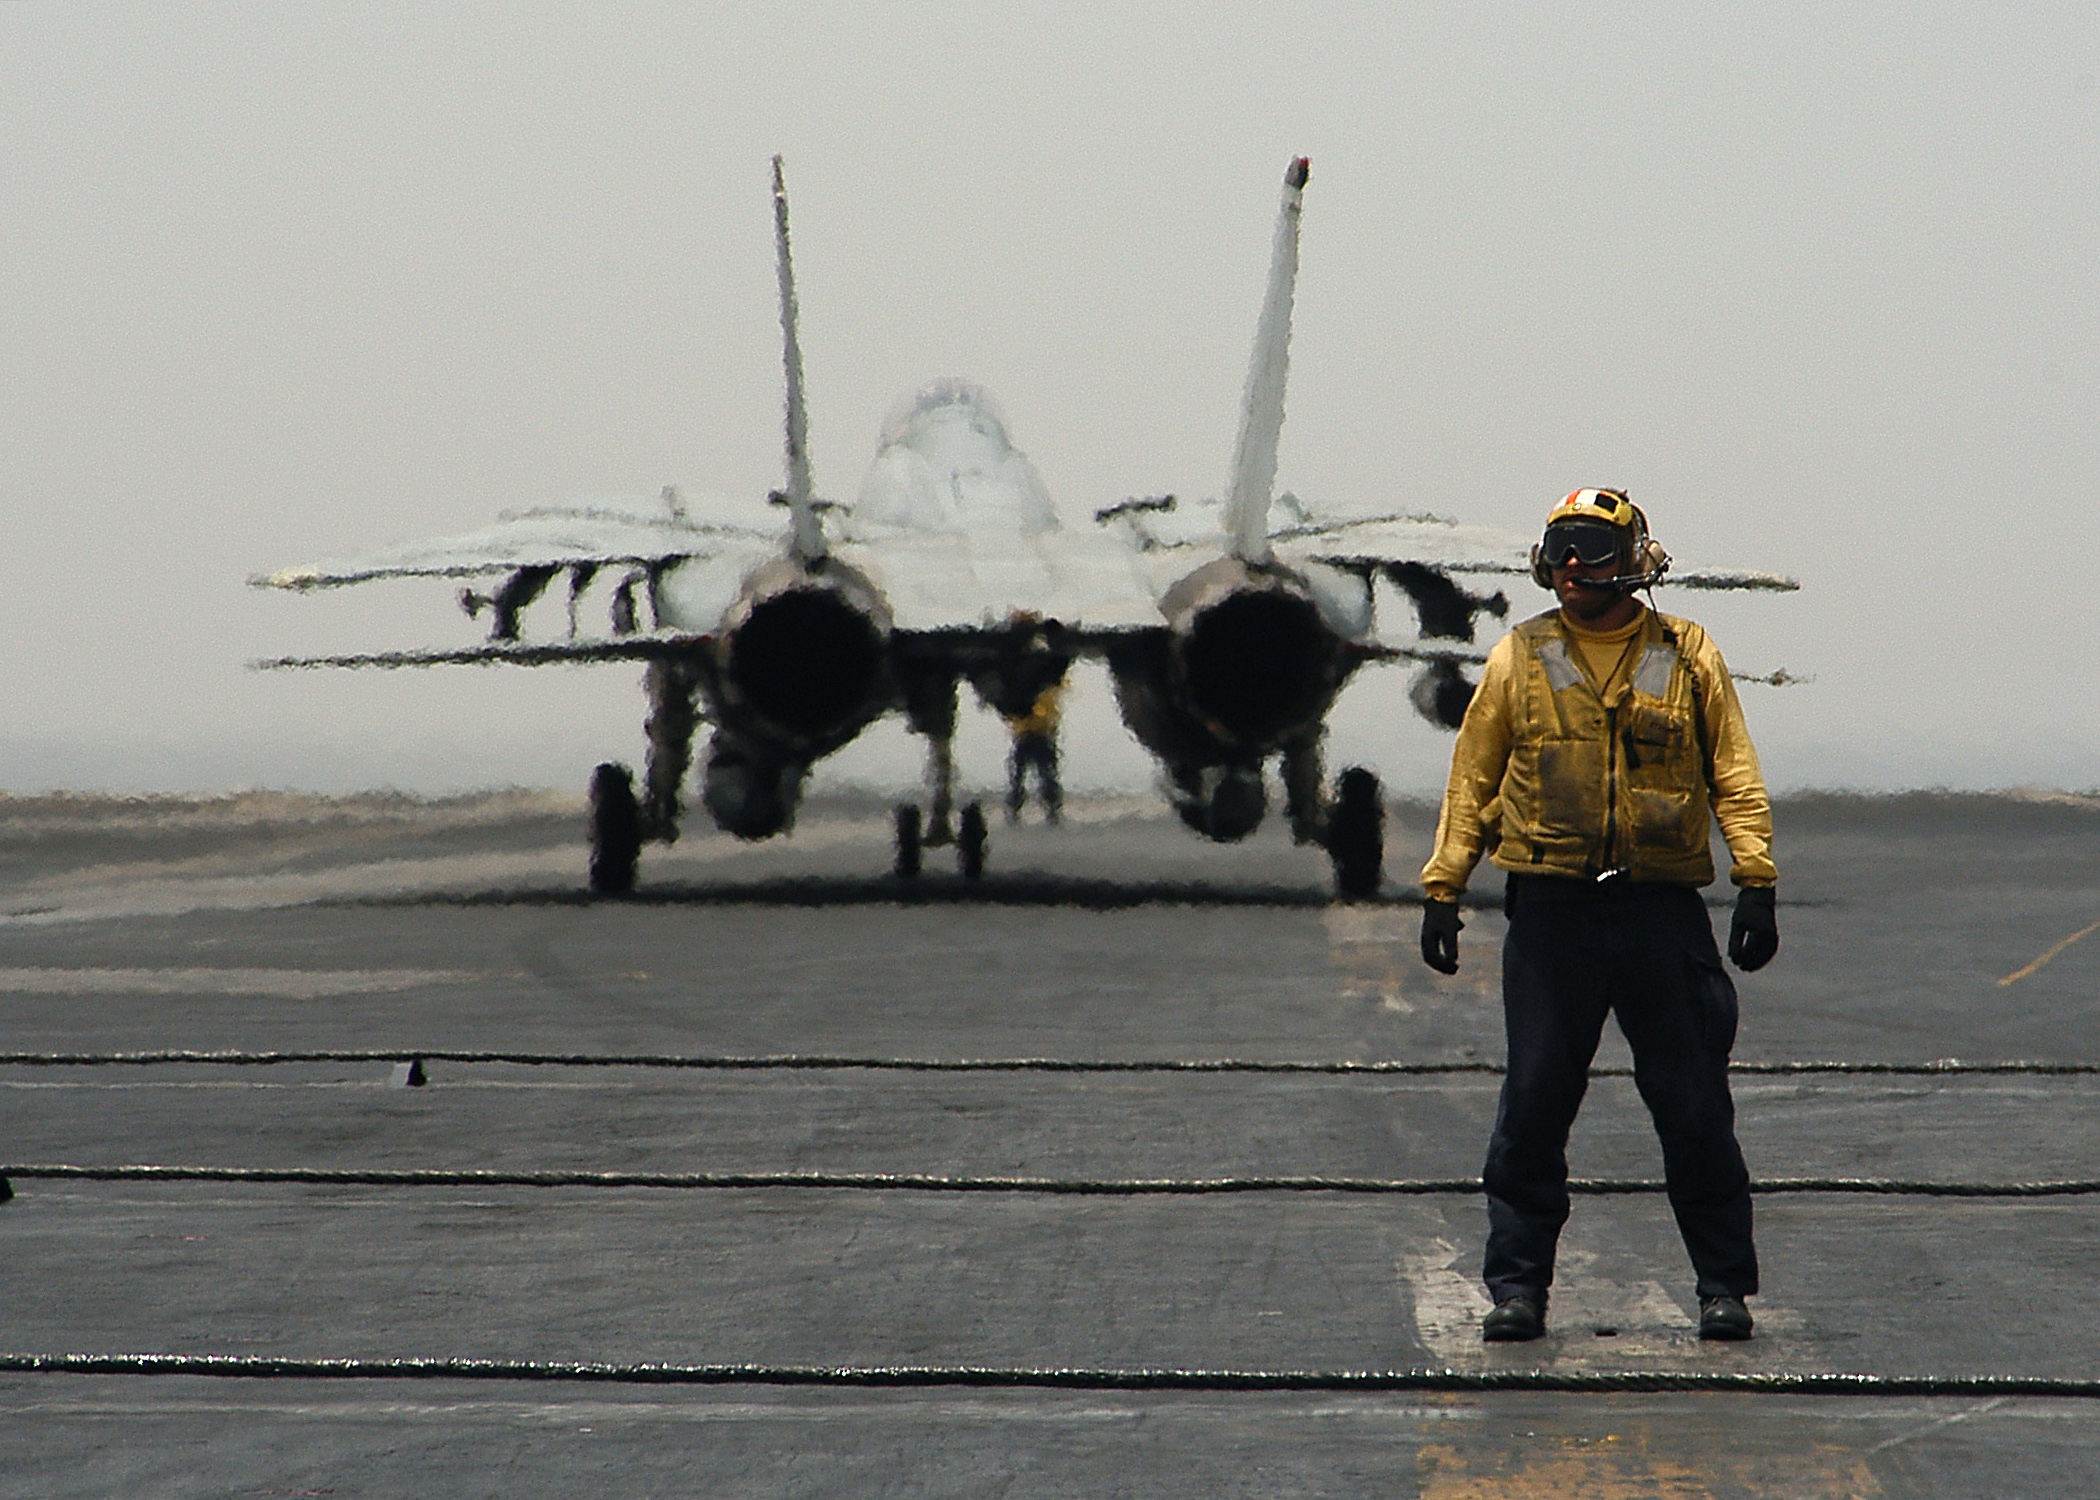 US Navy 040517-N-3986D-027 Aviation Boatswain's Mate 1st Class Lester Cruz of Lake Charles, La., awaits the next aircraft to direct to one of four catapults on the flight deck aboard USS George Washington (CVN 73)